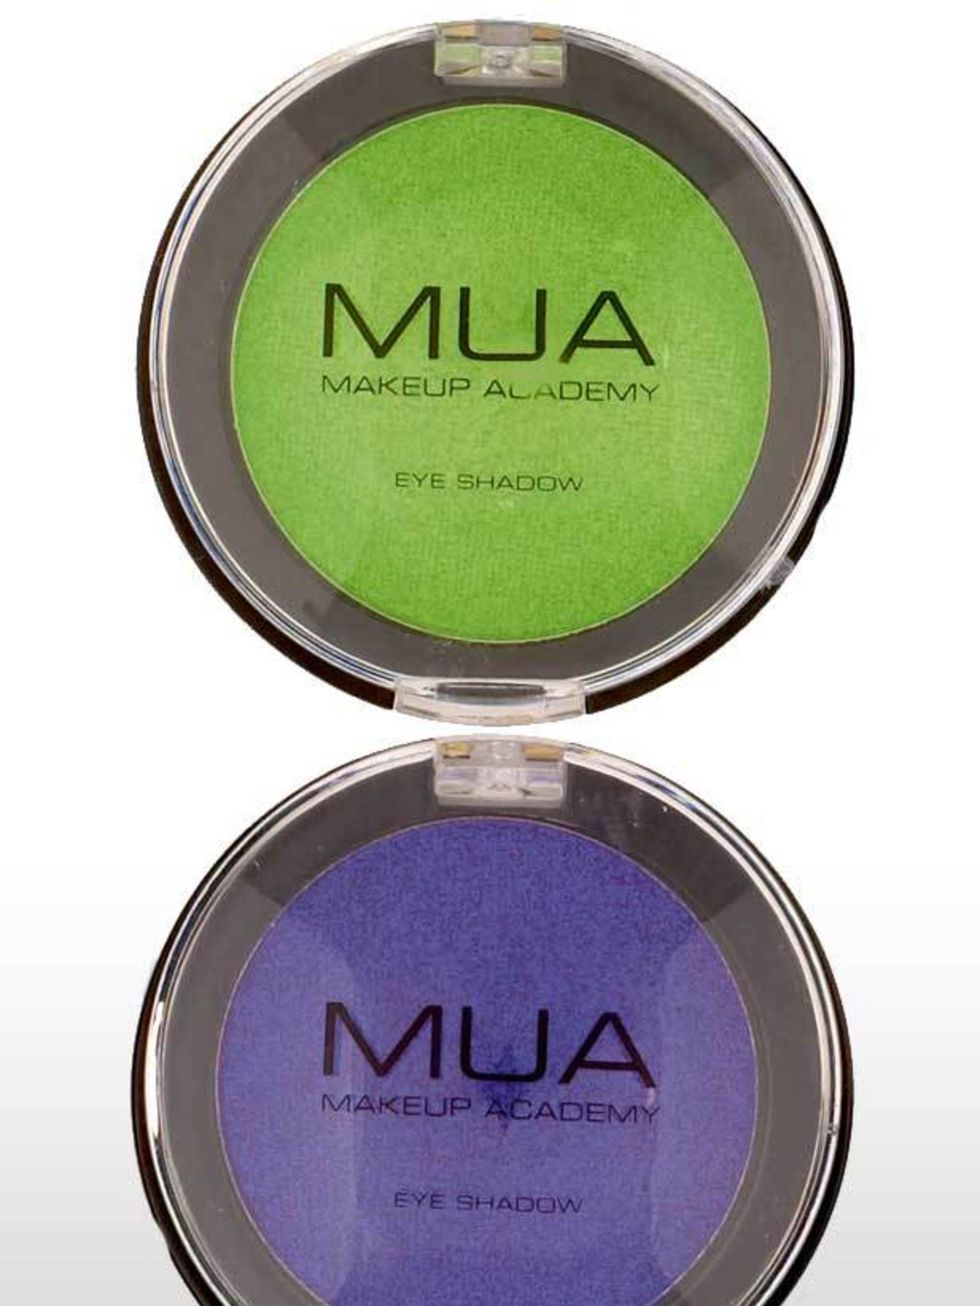 <p>These eyeshadows are impressive for £1  they are so purse friendly we recommend you snap up both these shades. The colours are vivid and will be the perfect addition to your festival/holiday make-up bag. </p><p>Eyeshadow in Shade 5- Pearl and Shade 9-